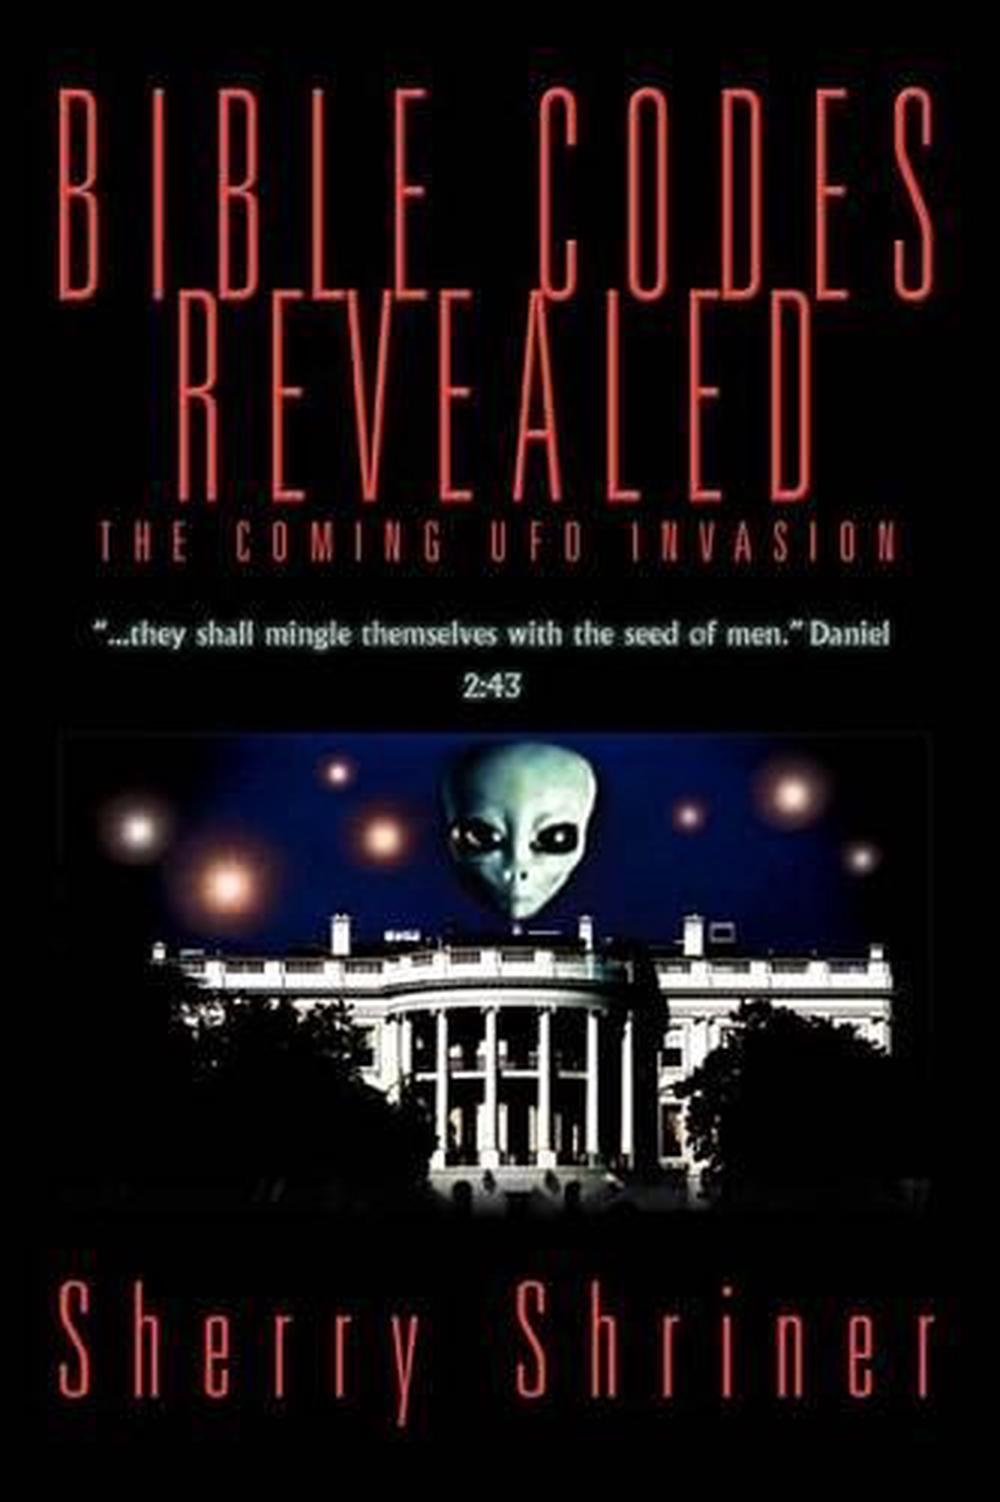 Bible Codes Revealed The Coming UFO Invasion by Sherry Shriner